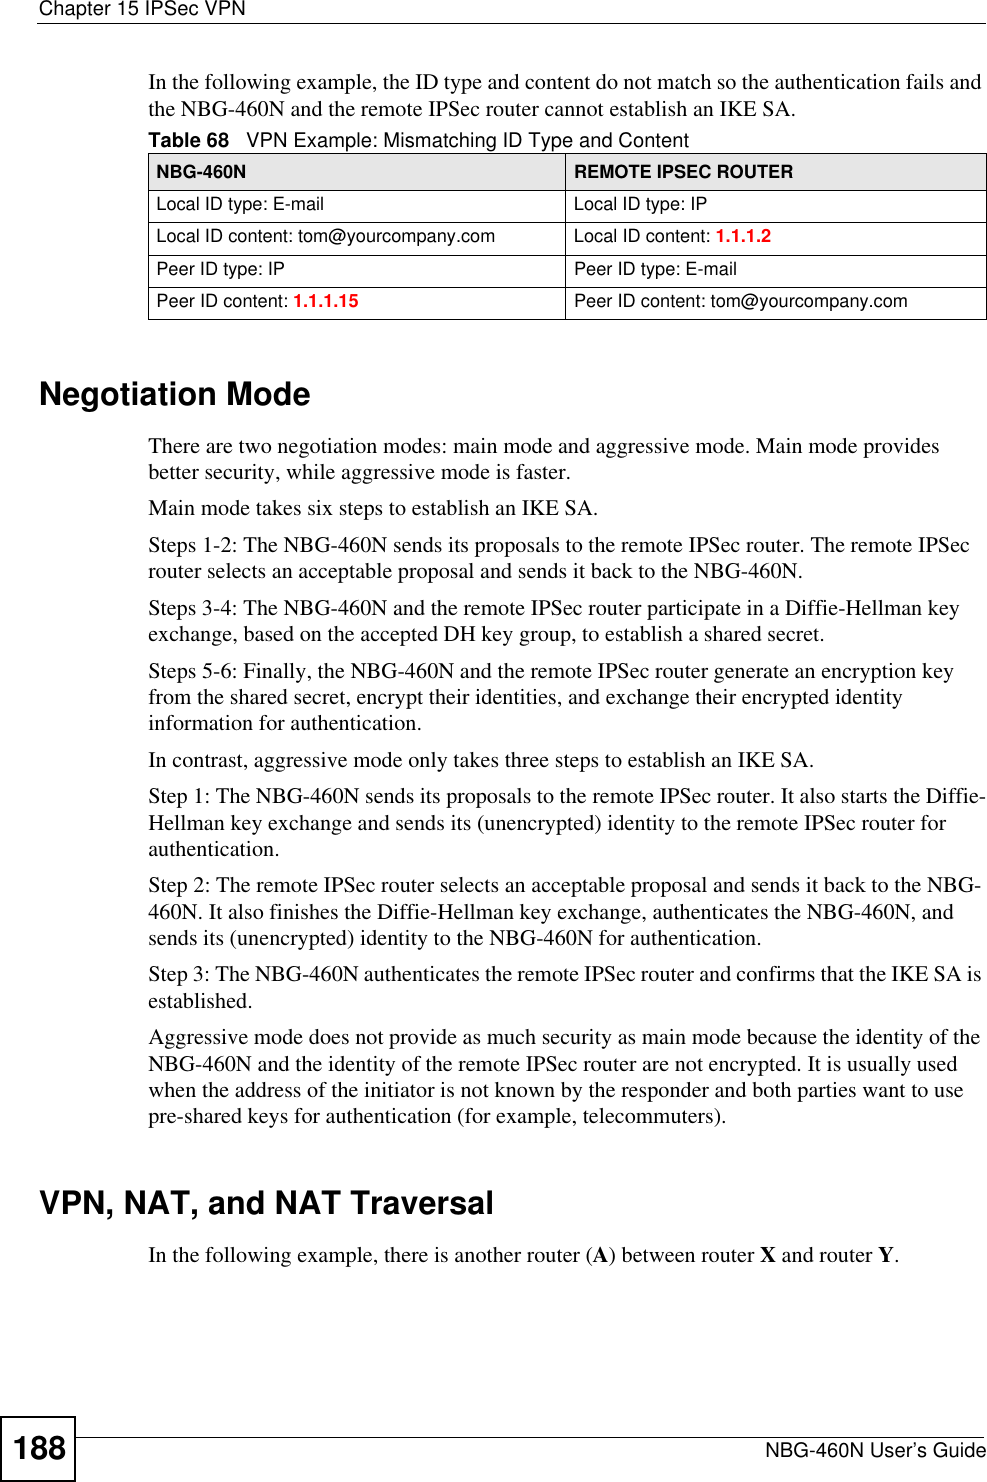 Chapter 15 IPSec VPNNBG-460N User’s Guide188In the following example, the ID type and content do not match so the authentication fails and the NBG-460N and the remote IPSec router cannot establish an IKE SA.Negotiation ModeThere are two negotiation modes: main mode and aggressive mode. Main mode provides better security, while aggressive mode is faster.Main mode takes six steps to establish an IKE SA.Steps 1-2: The NBG-460N sends its proposals to the remote IPSec router. The remote IPSec router selects an acceptable proposal and sends it back to the NBG-460N.Steps 3-4: The NBG-460N and the remote IPSec router participate in a Diffie-Hellman key exchange, based on the accepted DH key group, to establish a shared secret.Steps 5-6: Finally, the NBG-460N and the remote IPSec router generate an encryption key from the shared secret, encrypt their identities, and exchange their encrypted identity information for authentication.In contrast, aggressive mode only takes three steps to establish an IKE SA.Step 1: The NBG-460N sends its proposals to the remote IPSec router. It also starts the Diffie-Hellman key exchange and sends its (unencrypted) identity to the remote IPSec router for authentication.Step 2: The remote IPSec router selects an acceptable proposal and sends it back to the NBG-460N. It also finishes the Diffie-Hellman key exchange, authenticates the NBG-460N, and sends its (unencrypted) identity to the NBG-460N for authentication.Step 3: The NBG-460N authenticates the remote IPSec router and confirms that the IKE SA is established.Aggressive mode does not provide as much security as main mode because the identity of the NBG-460N and the identity of the remote IPSec router are not encrypted. It is usually used when the address of the initiator is not known by the responder and both parties want to use pre-shared keys for authentication (for example, telecommuters).VPN, NAT, and NAT TraversalIn the following example, there is another router (A) between router X and router Y.Table 68   VPN Example: Mismatching ID Type and ContentNBG-460N REMOTE IPSEC ROUTERLocal ID type: E-mail Local ID type: IPLocal ID content: tom@yourcompany.com Local ID content: 1.1.1.2Peer ID type: IP Peer ID type: E-mailPeer ID content: 1.1.1.15 Peer ID content: tom@yourcompany.com